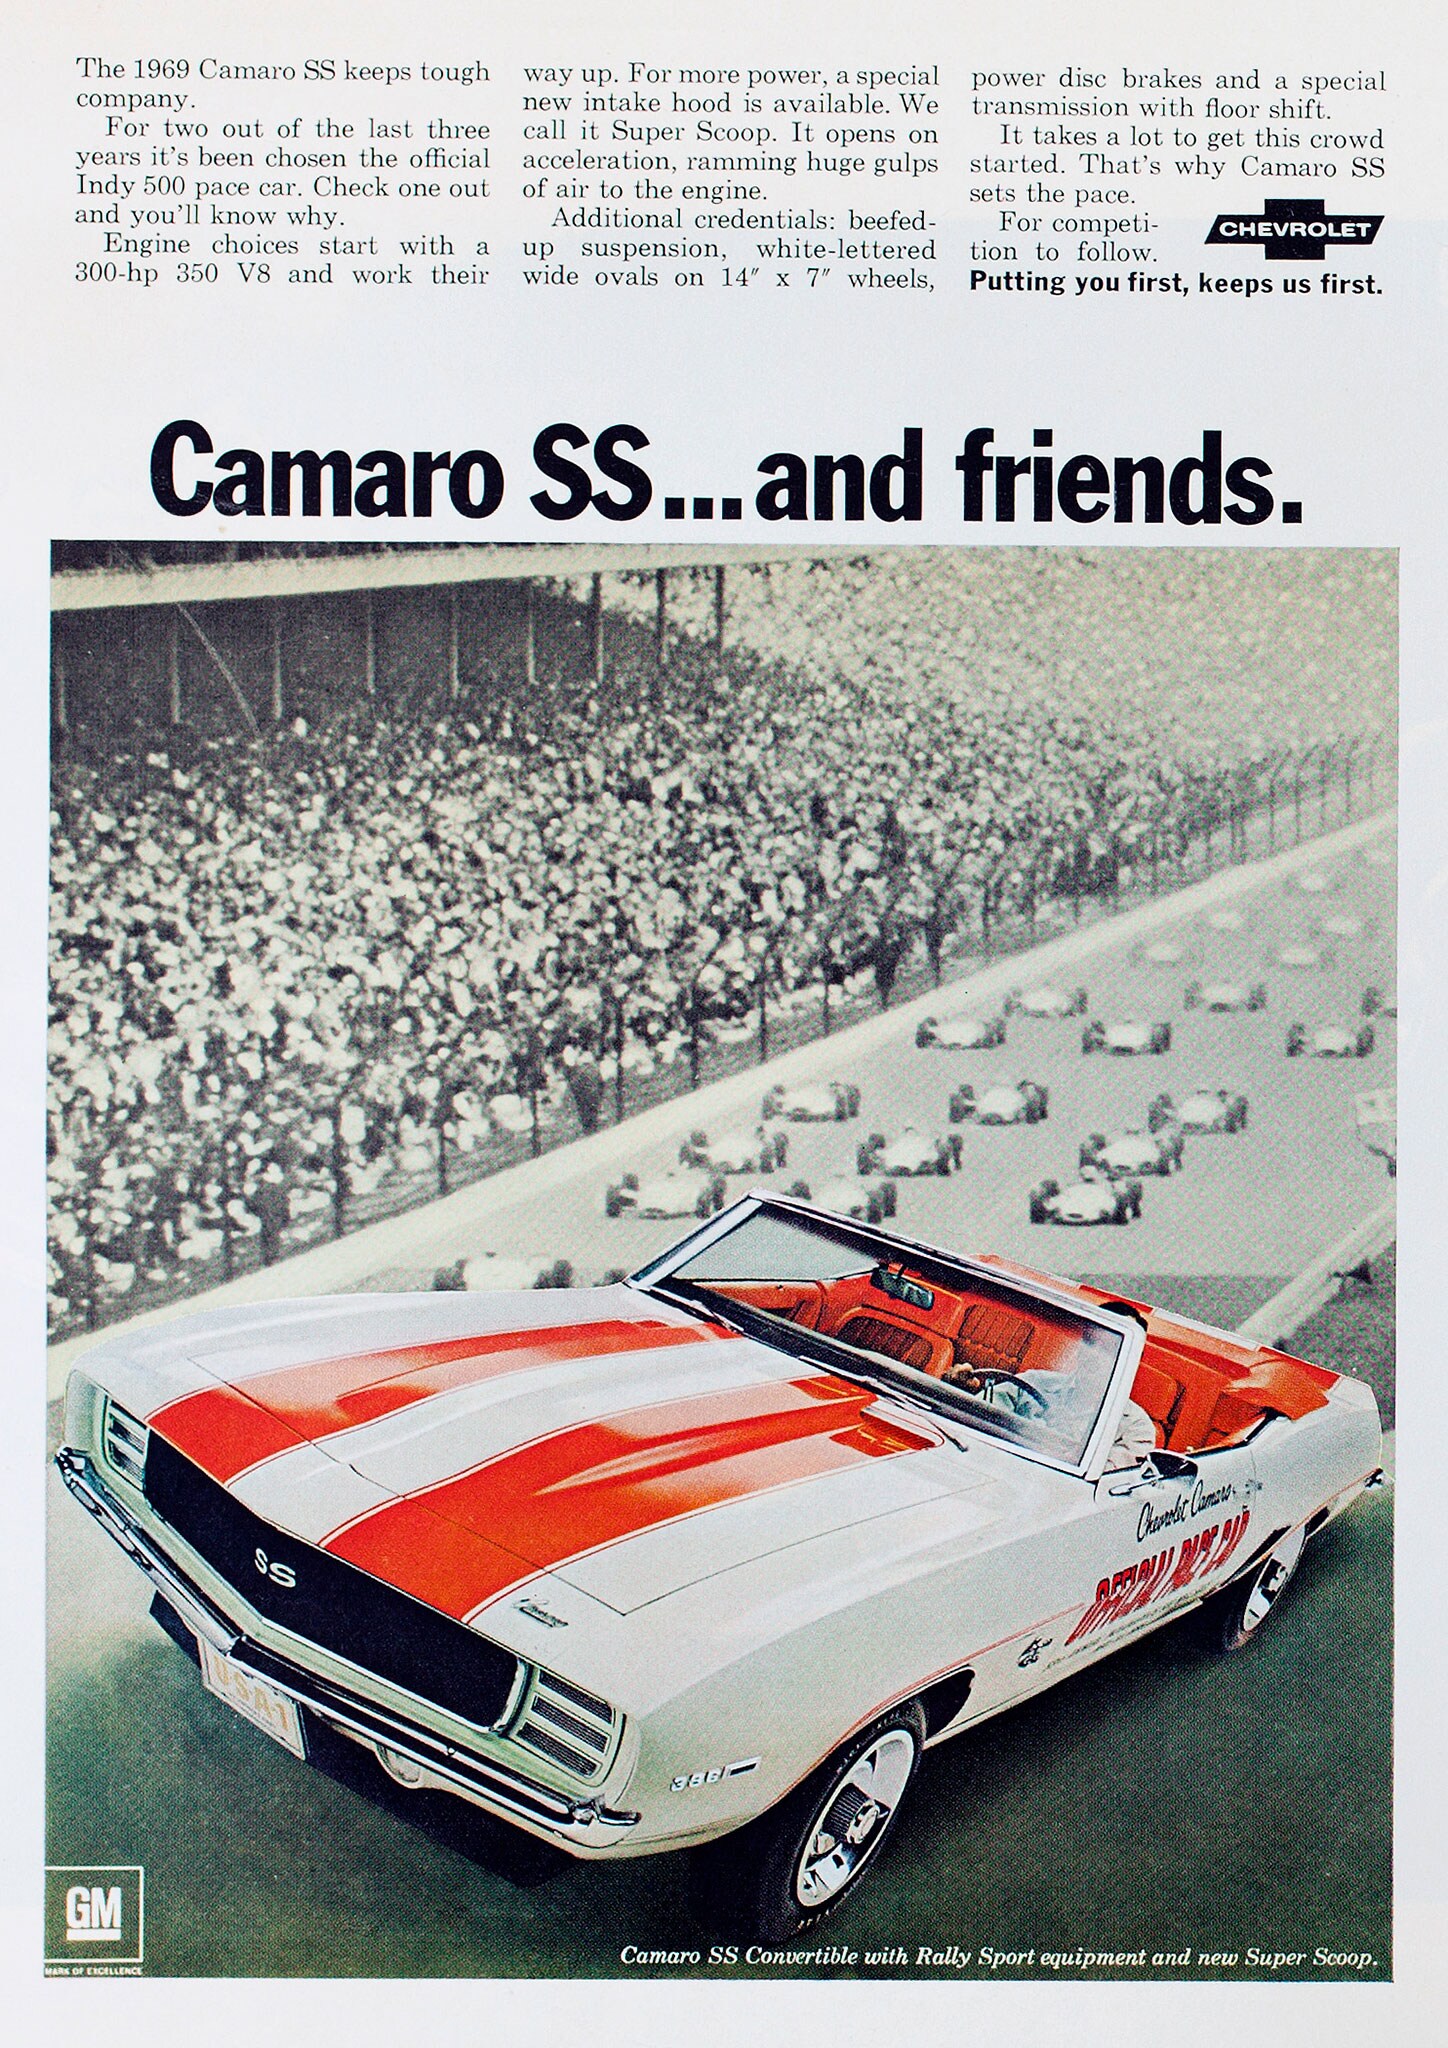 202 1969 pace car ad Camaro SS and friends